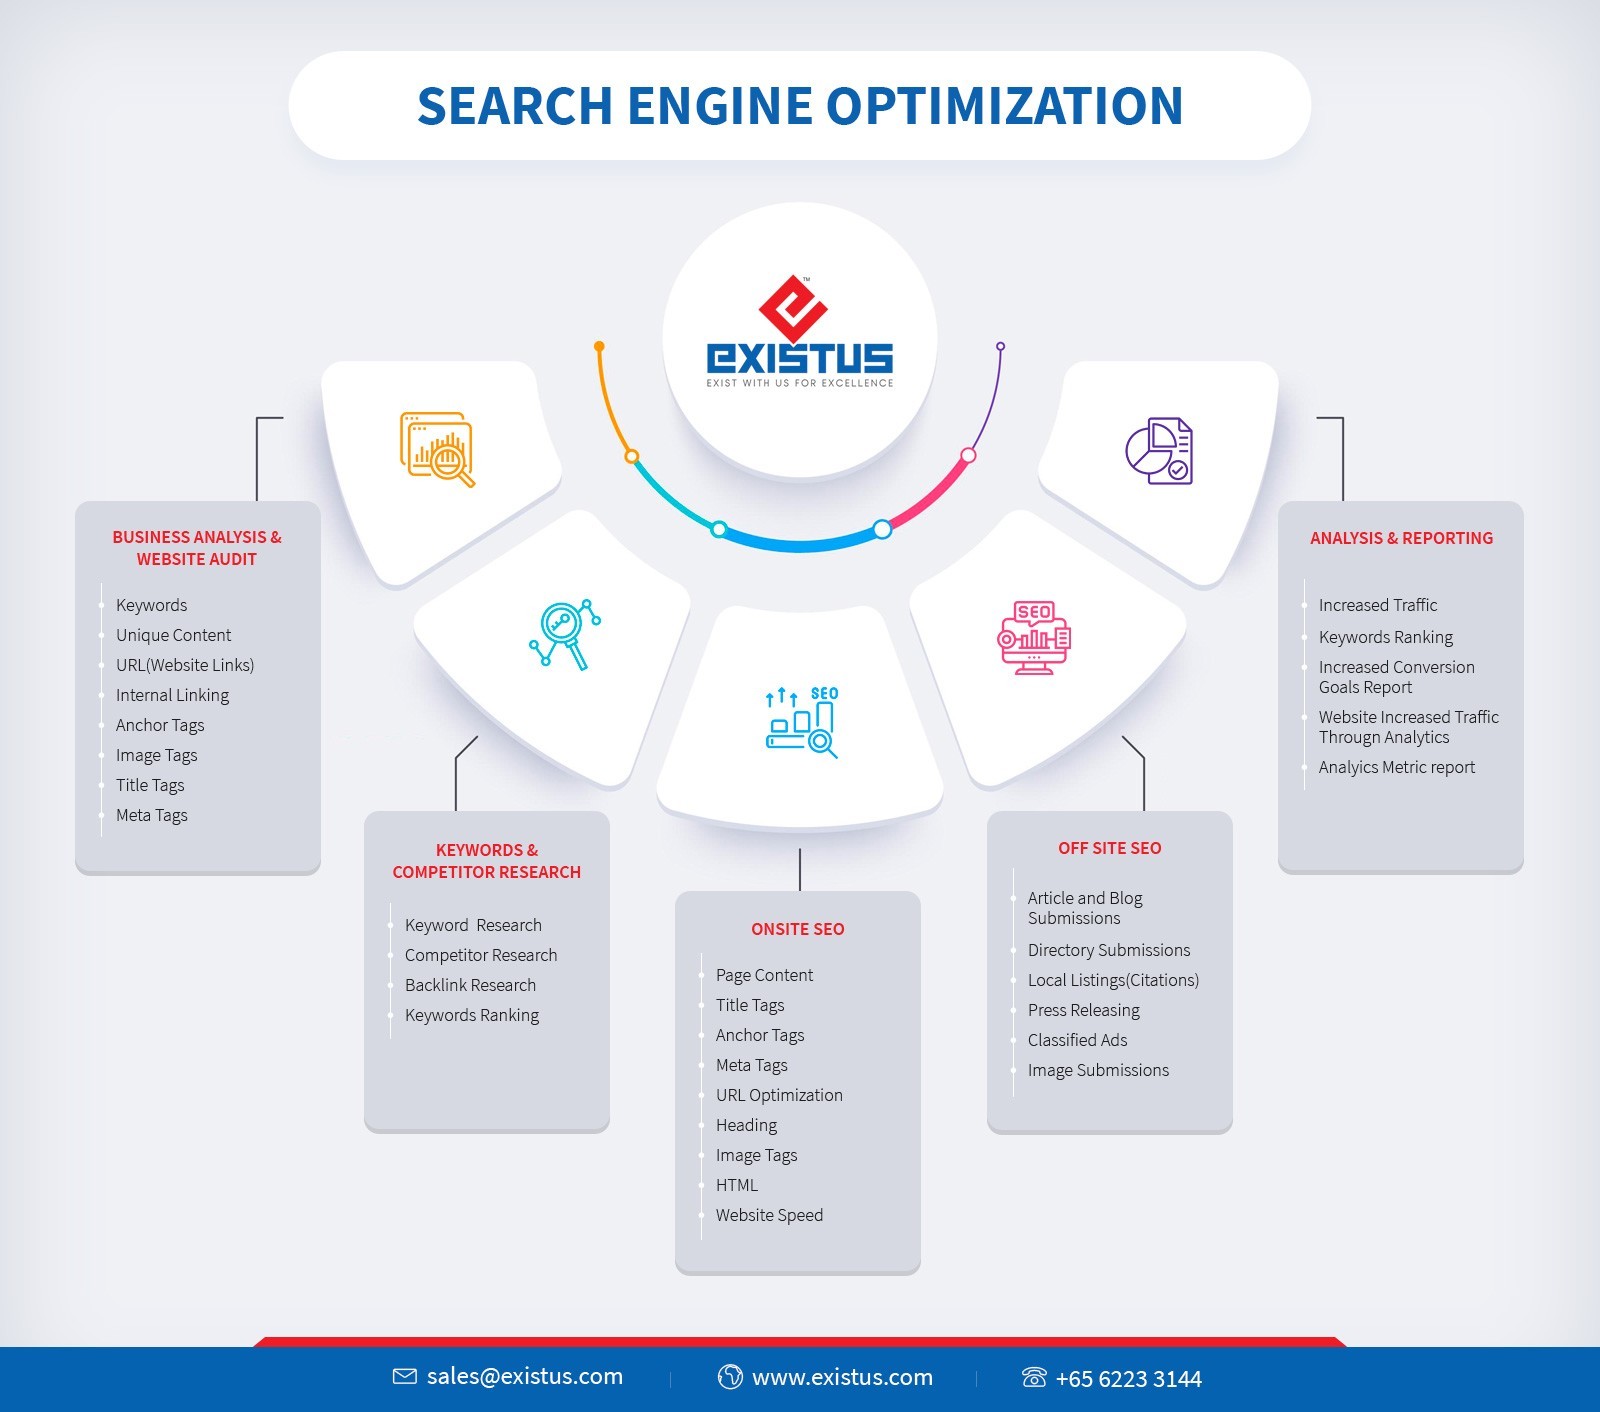 How To Optimize Your Website For Search Engine Optimization (SEO)